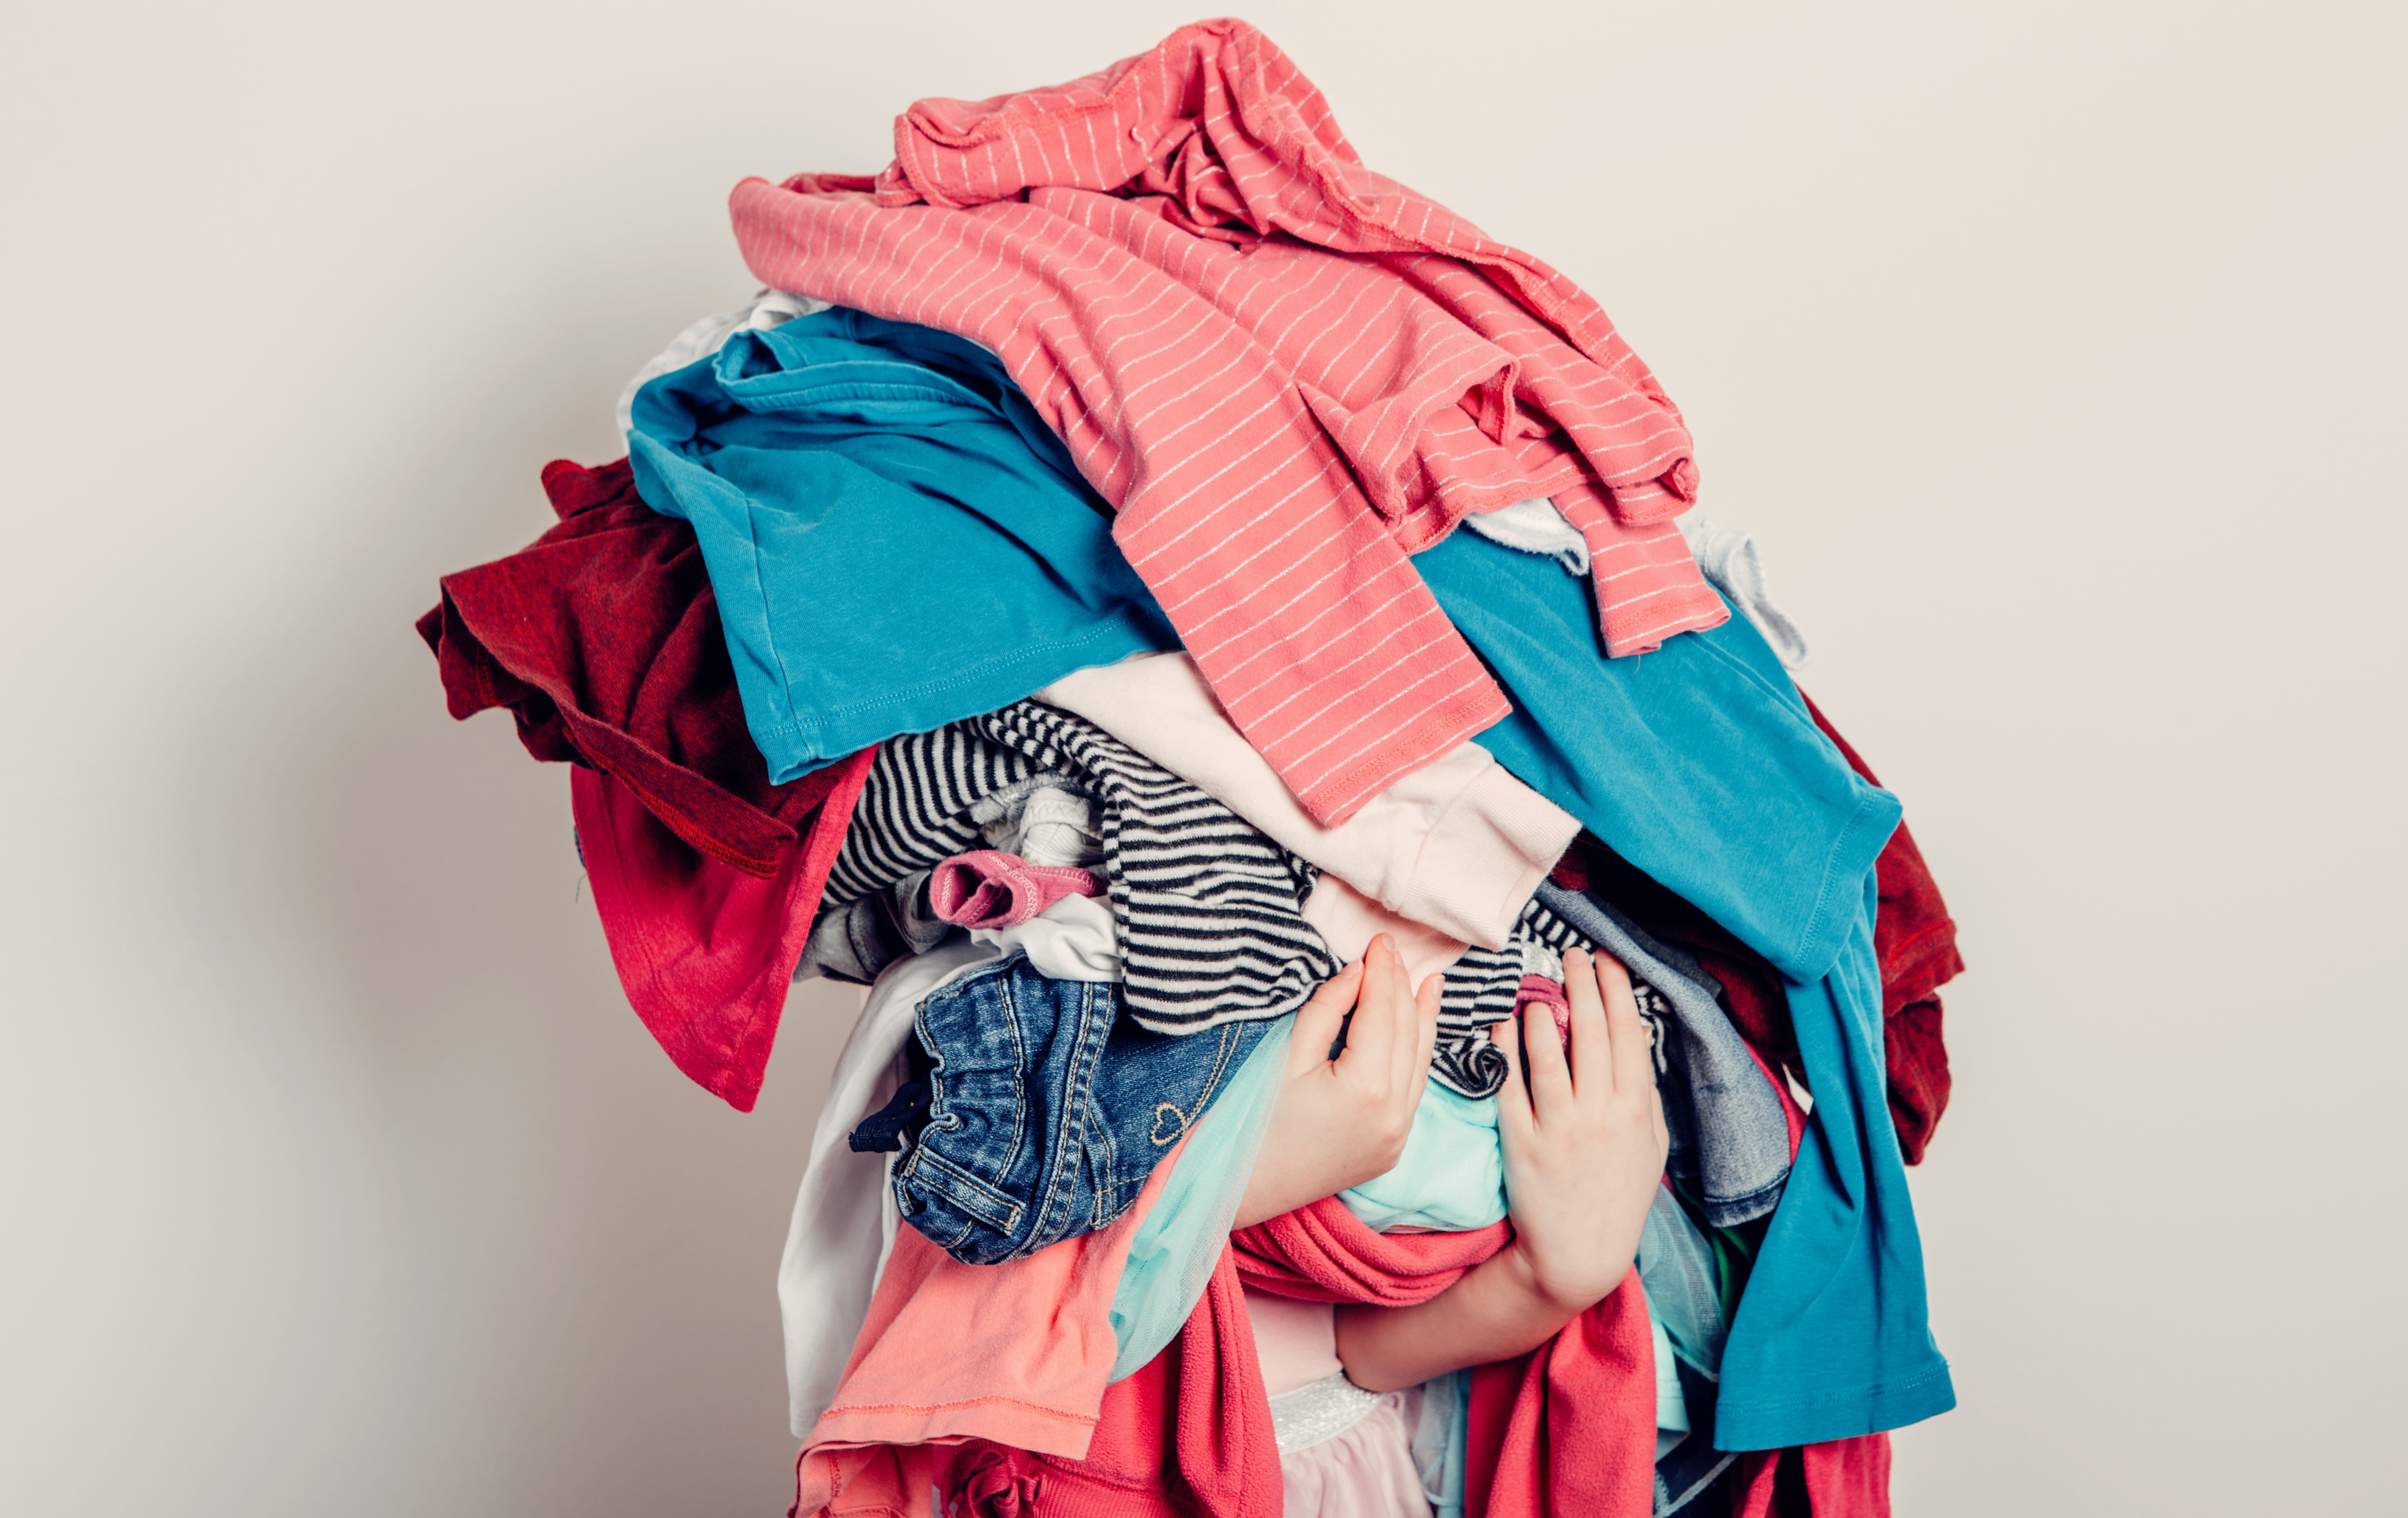 7 Eco-Friendly Ways to Get Rid of Used Clothes